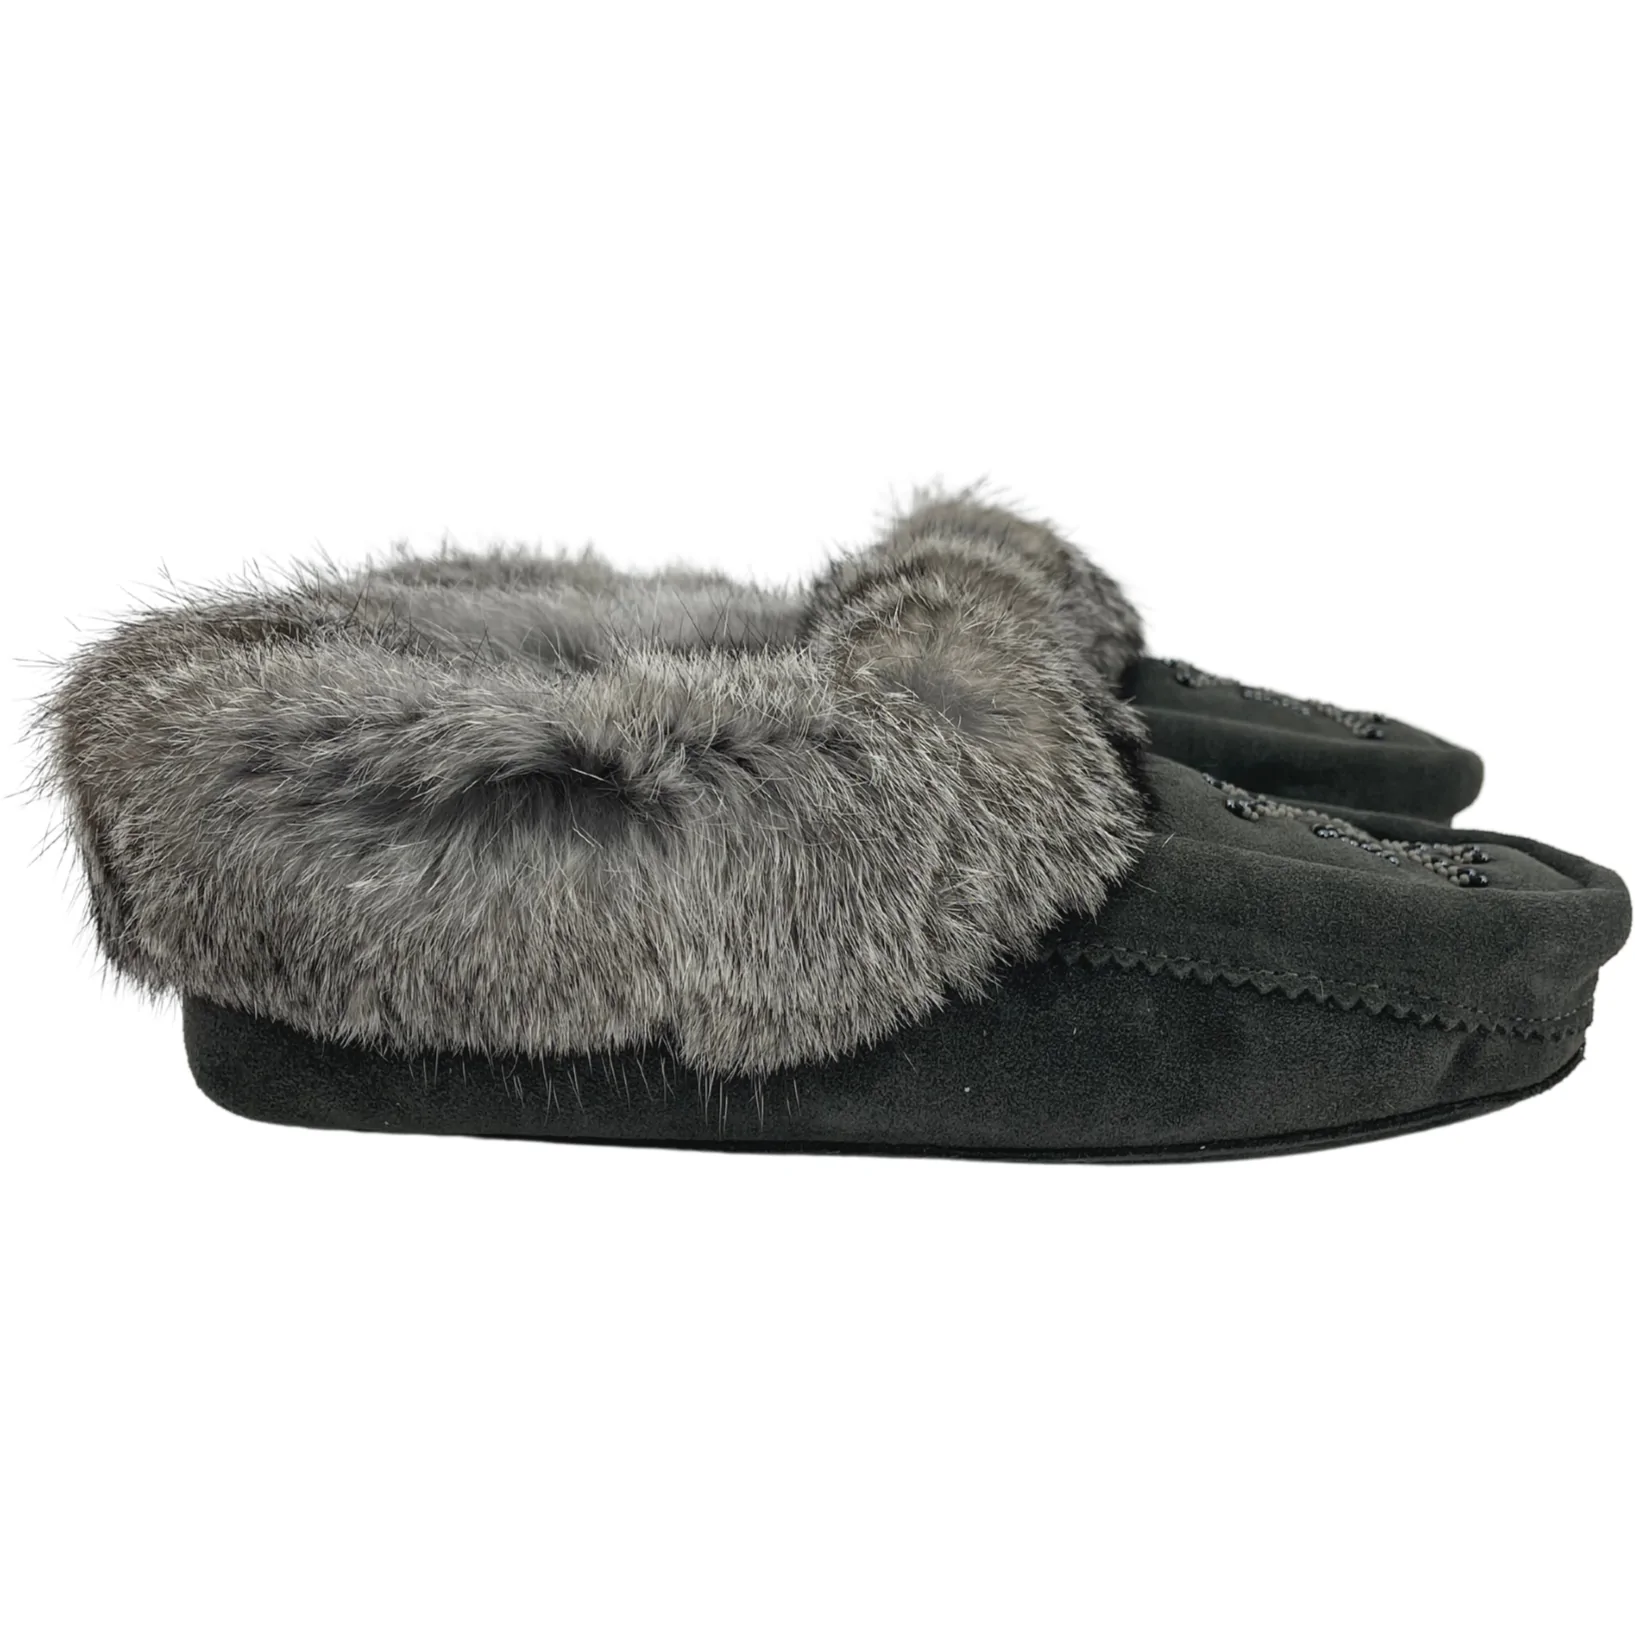 Manitobah Muklucks Women's Moccasins / Charcoal / Women's Soft Sole Slippers / Size 8 **No Tags**